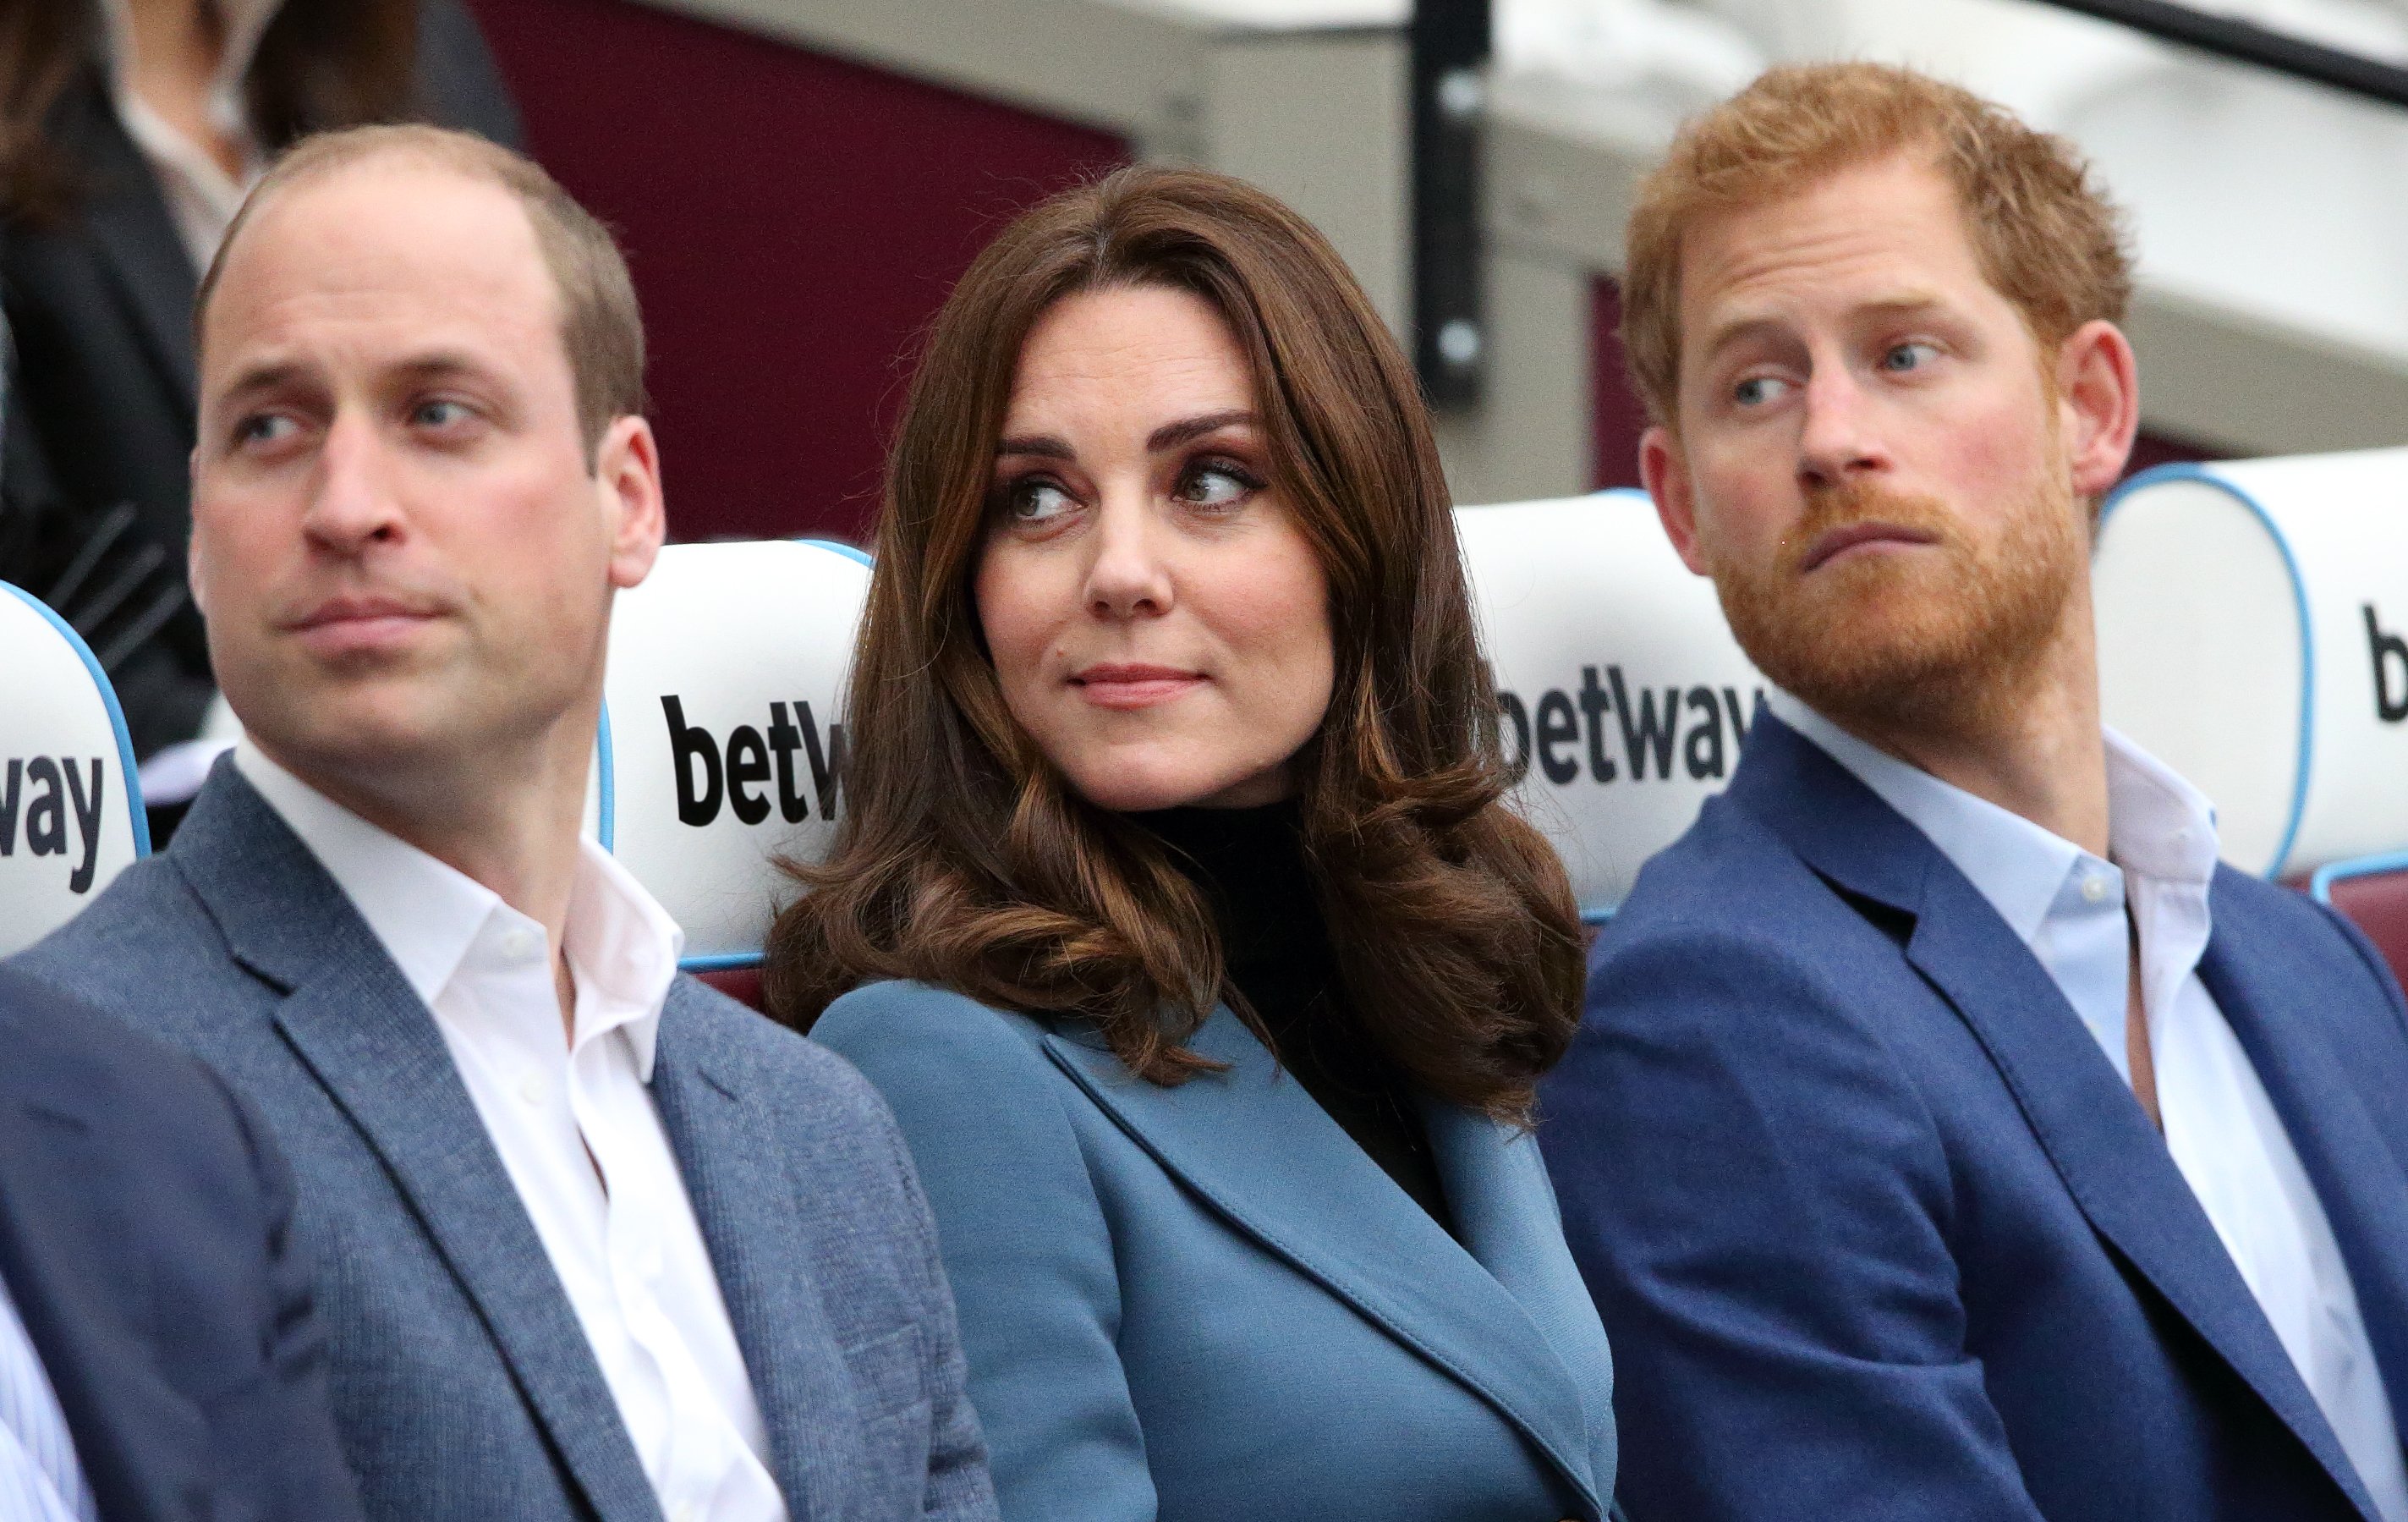 Prince William, Kate Middleton and Prince Harry during the Coach Core graduation ceremony at The London Stadium on October 18, 2017 in London, England. | Source: Getty Images